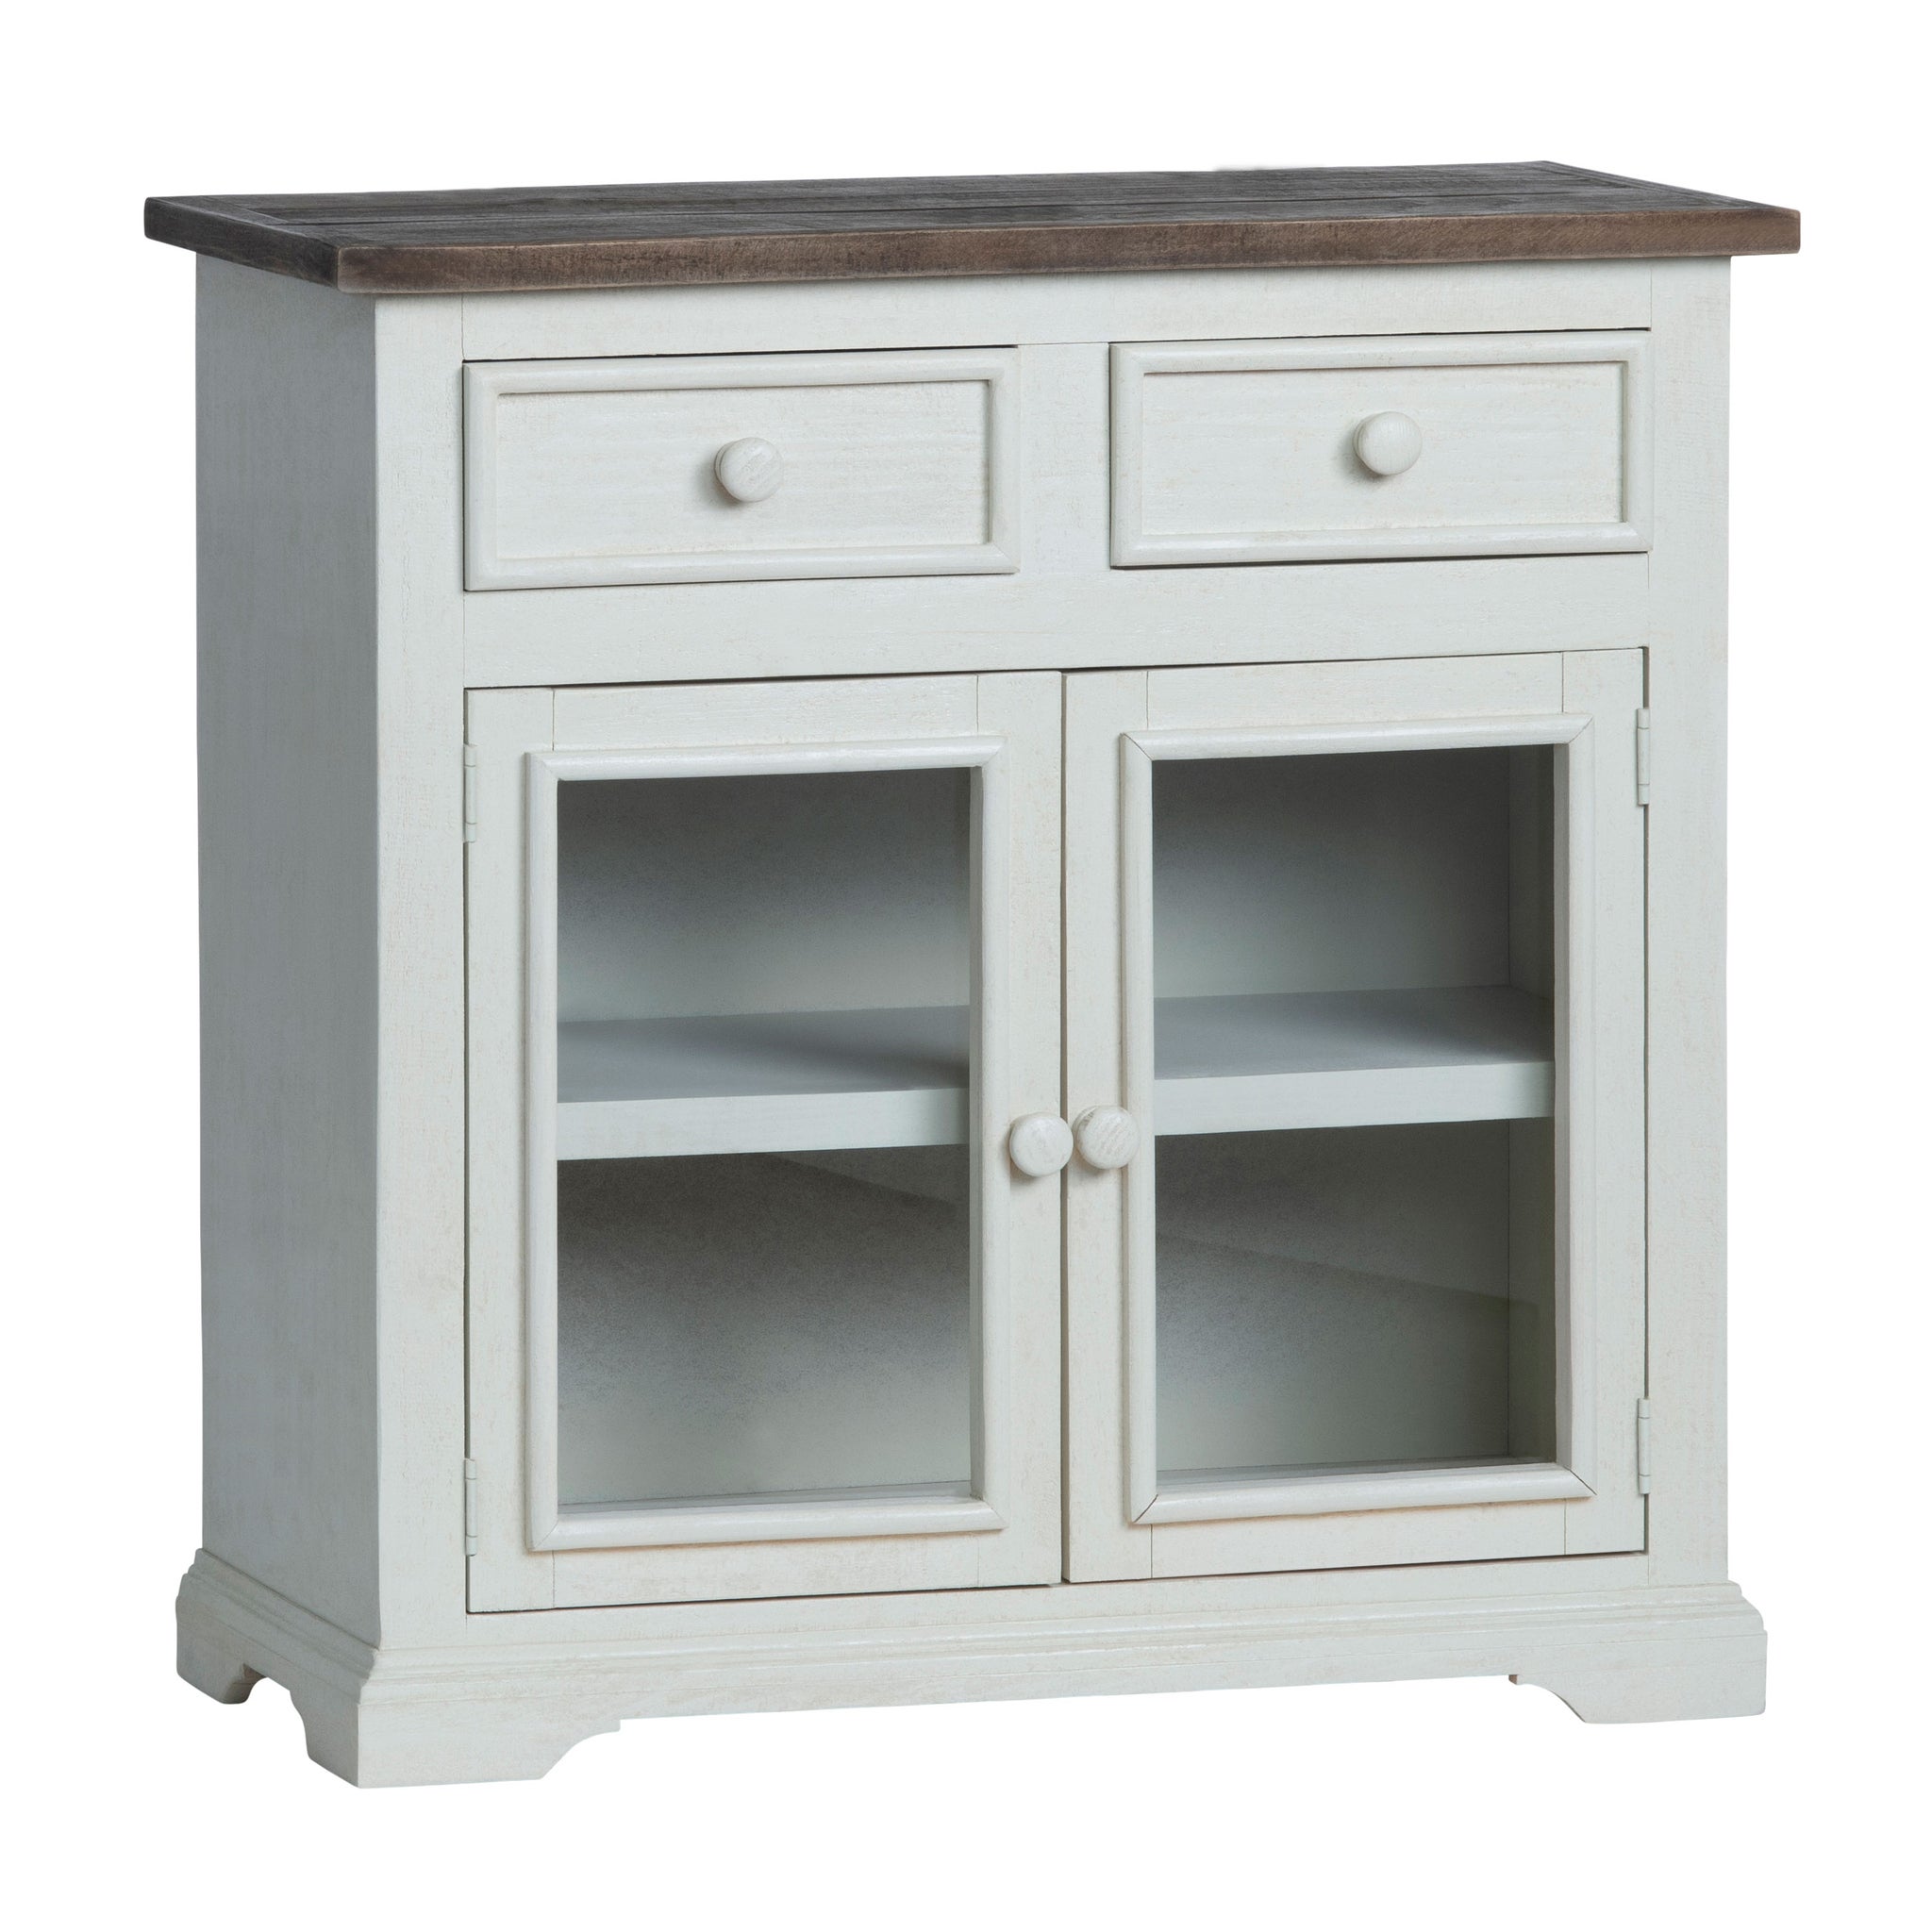 Crestview Collection - Furniture - Accents - Rustic